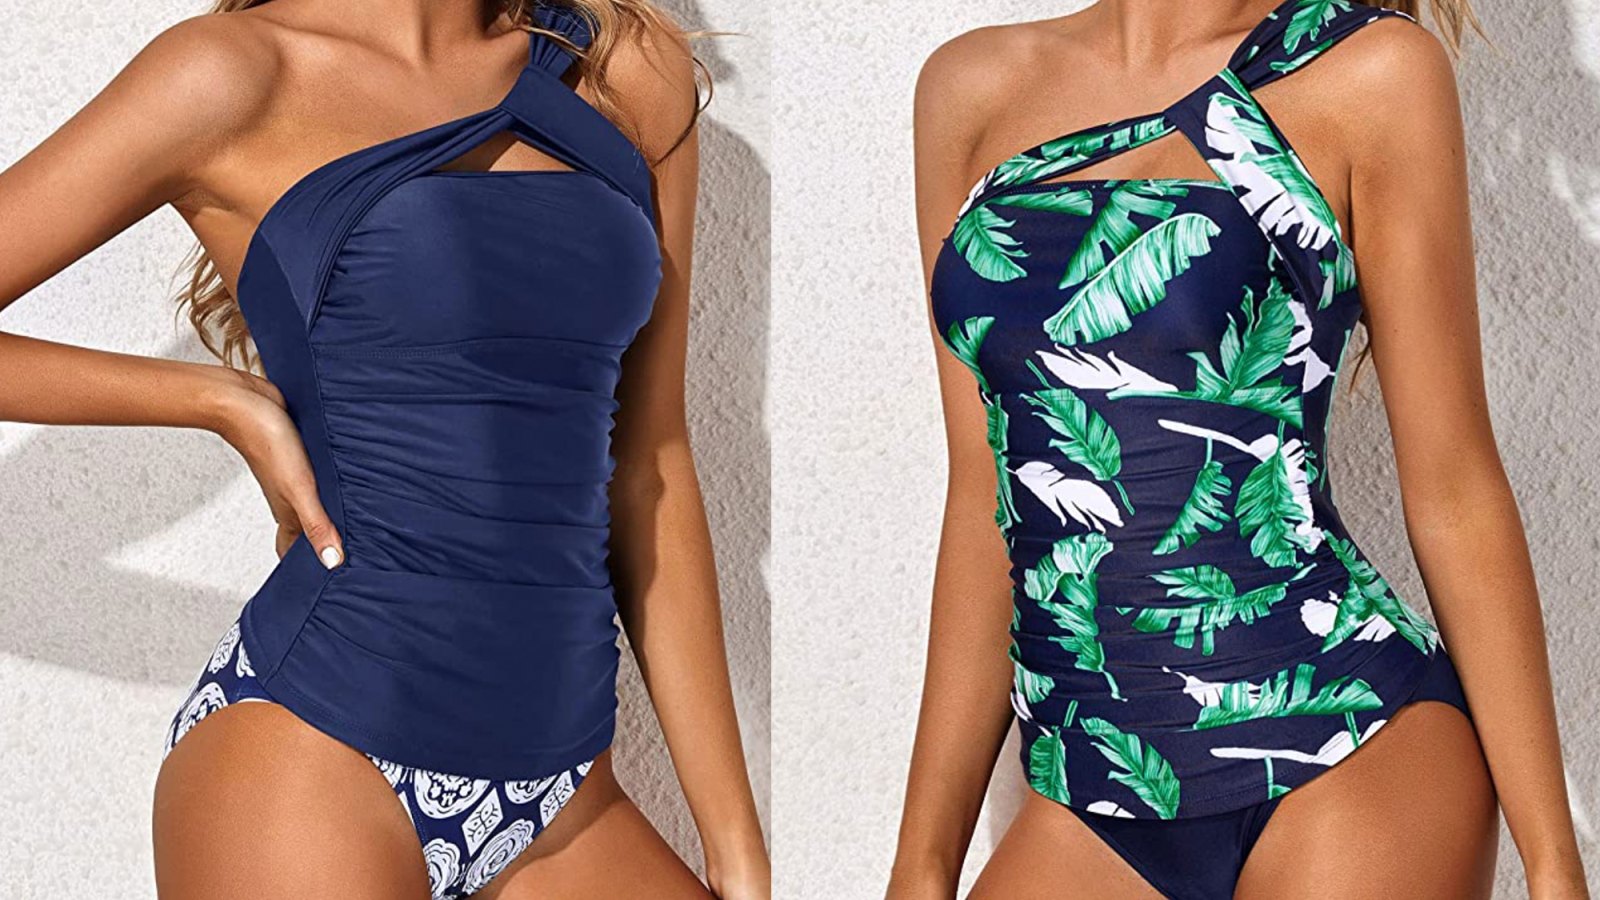 Tempt Me Swim Set Will Make You Believe Tankinis Can Look Chic